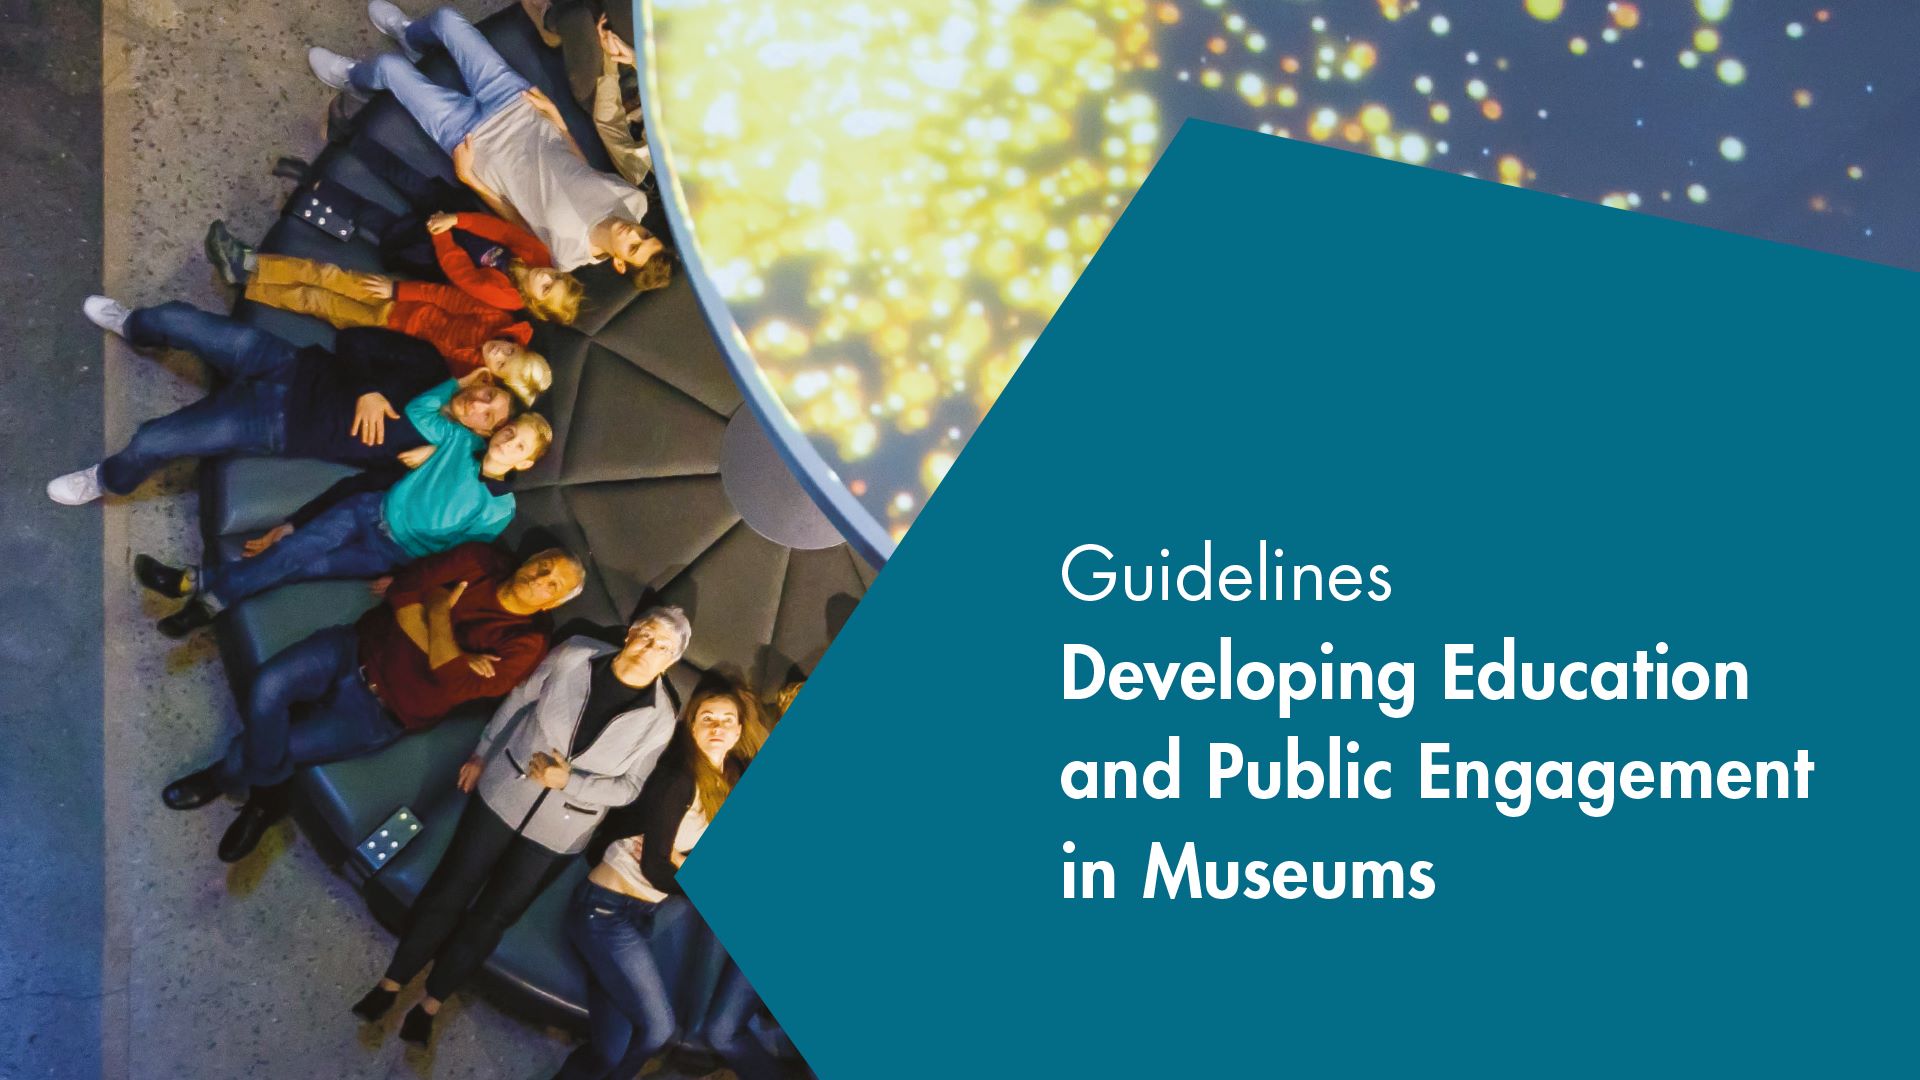 Picture has the text of the publication title "Guidelines Developing Education and Public Engagement in Museums". A group of people are laying o na circular couch and looking up. The picture is take looking down at the people.  